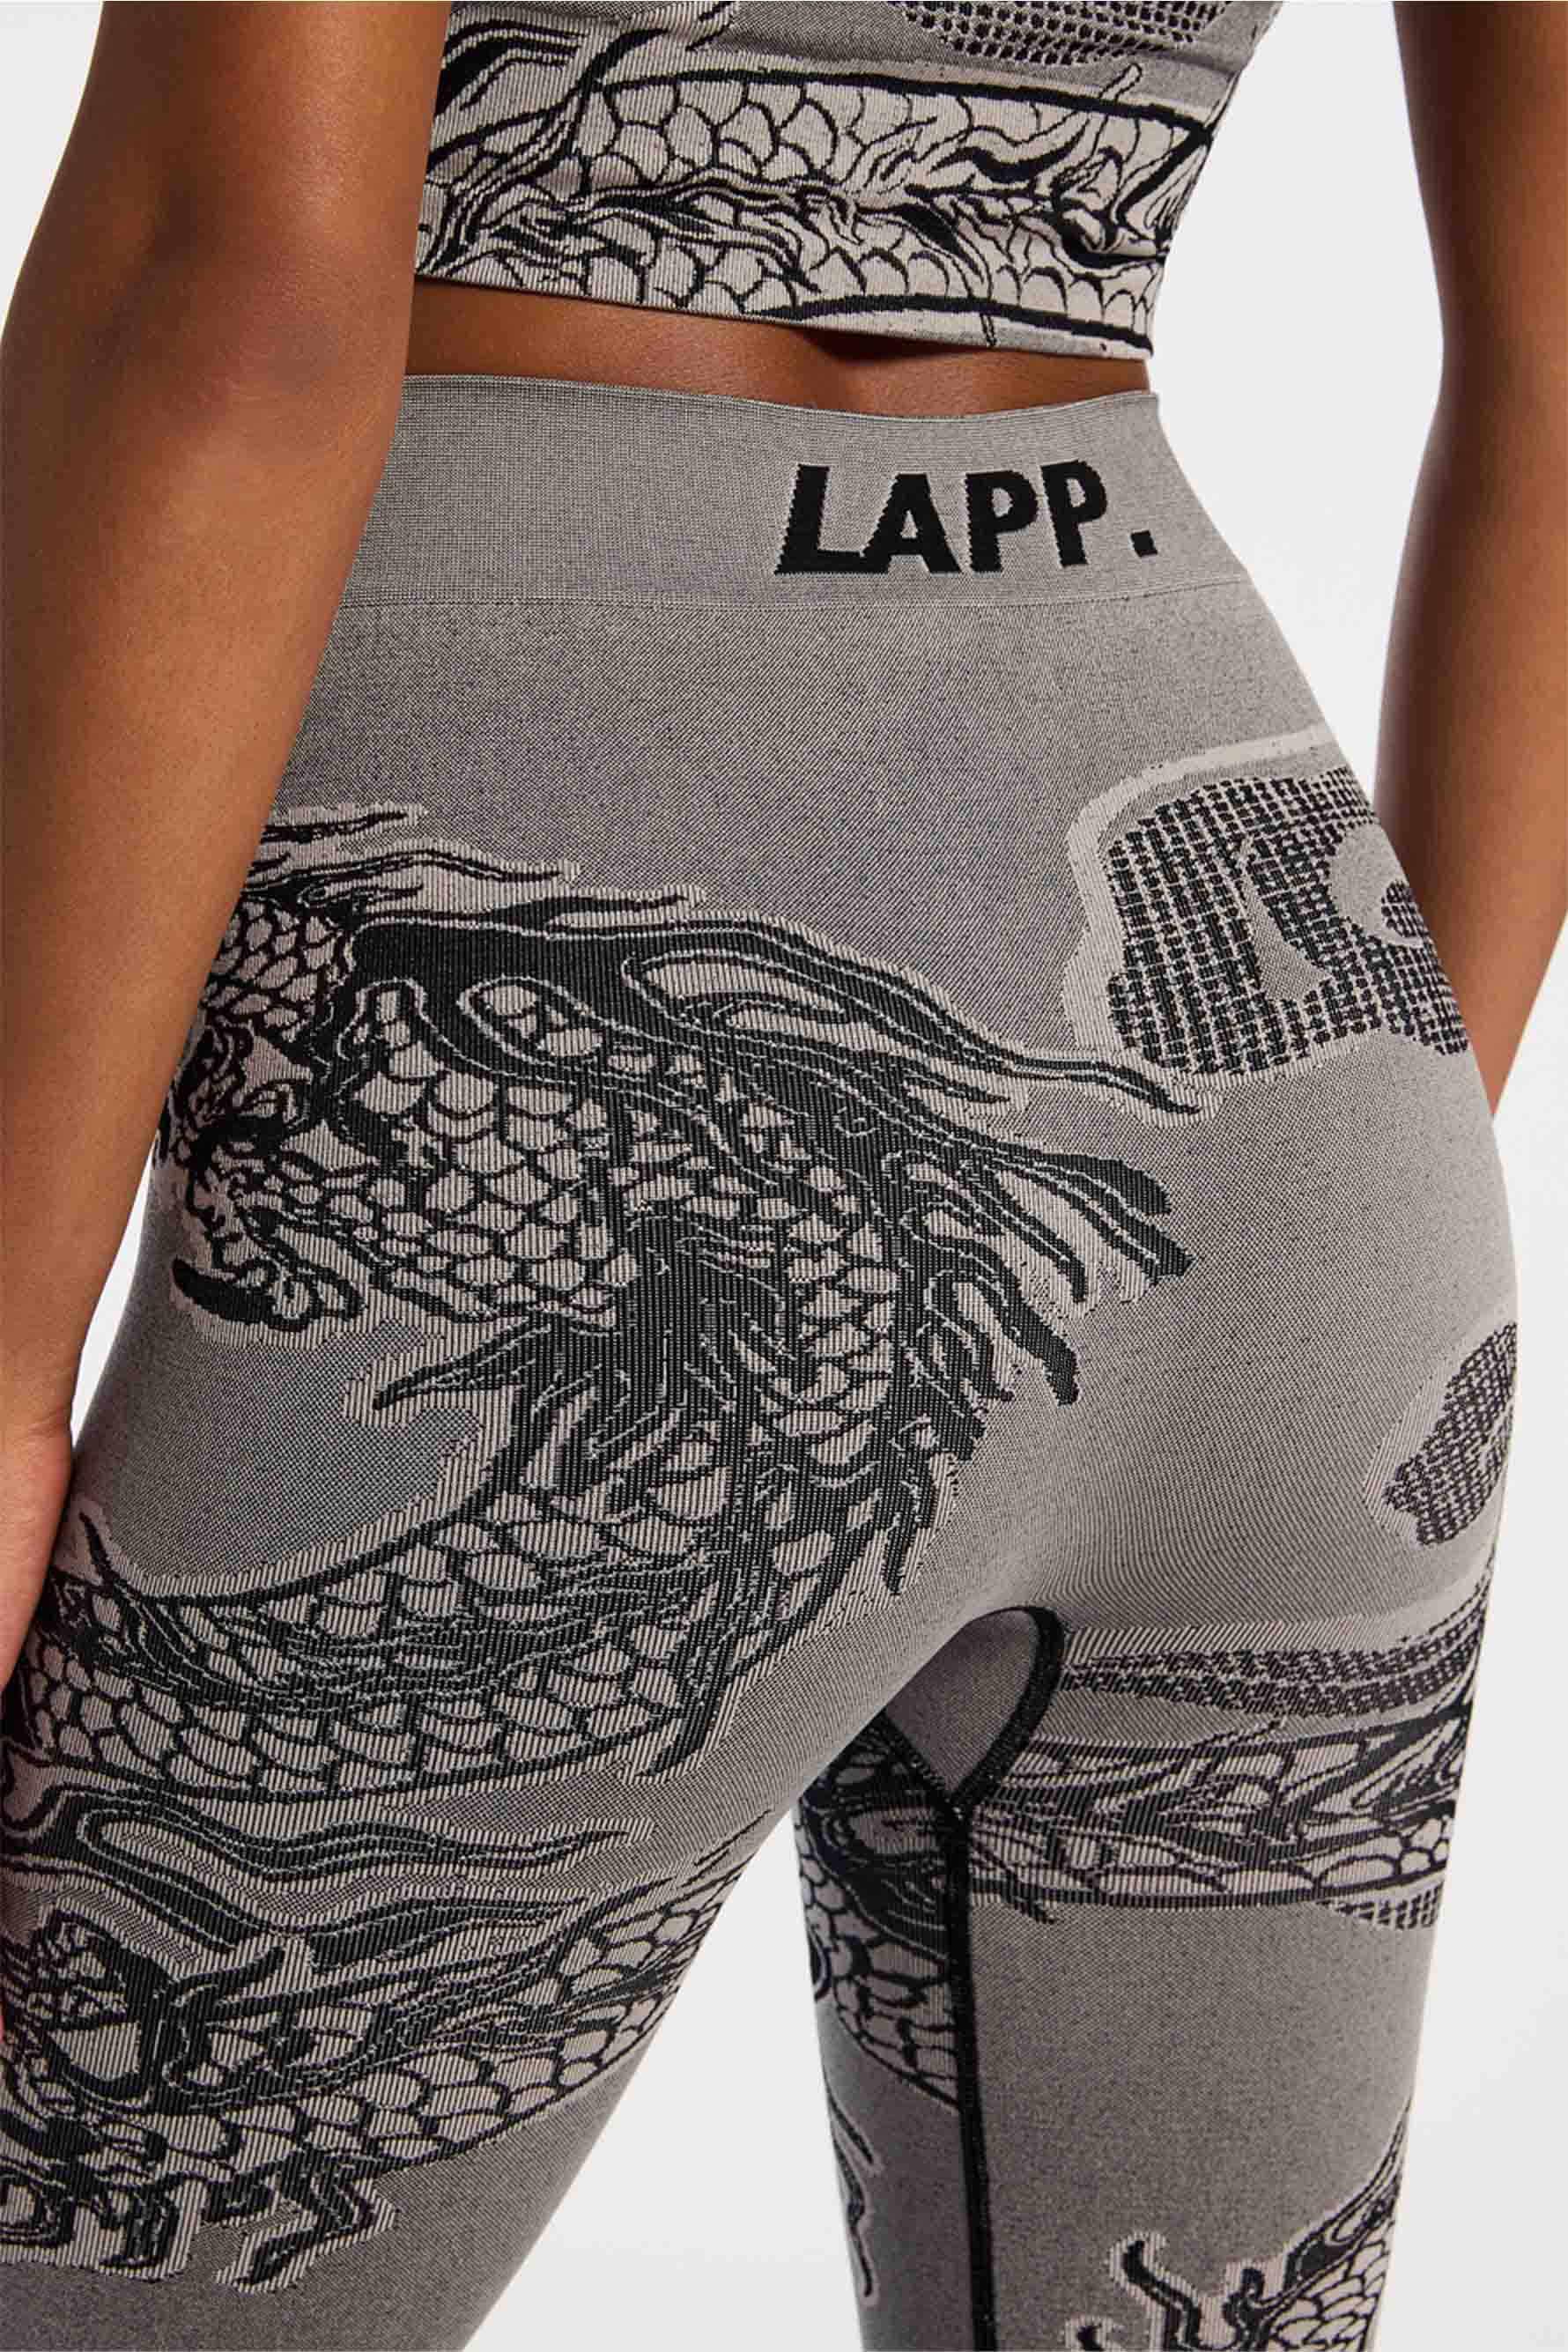 BE PRESENT DARK gray mobility yoga pants with black Dragon Graphic $66.00 -  PicClick